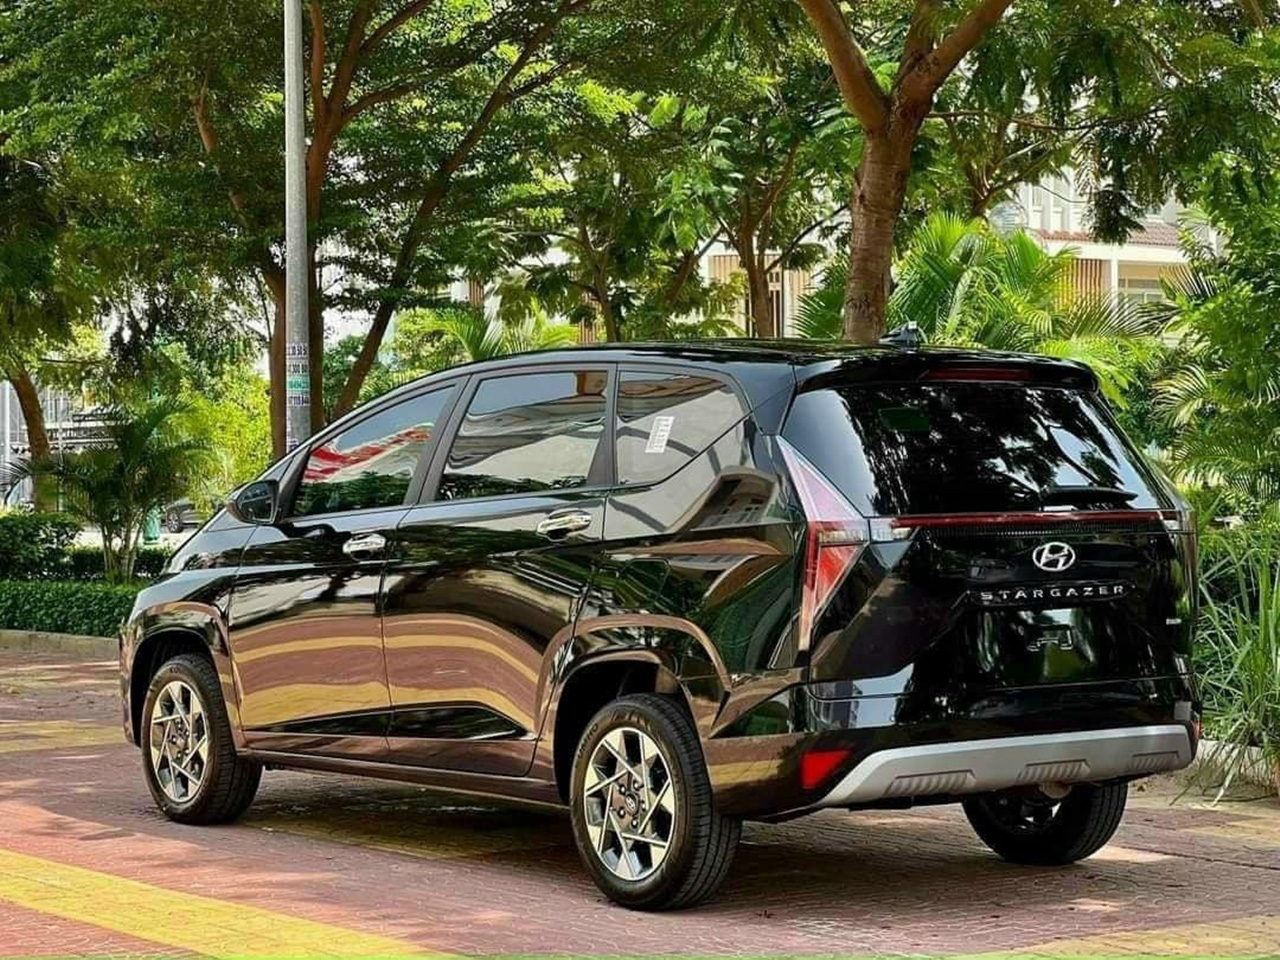 Unlike most cars in the popular MPV segment, the Hyundai Stargazer is not equipped with a manual transmission.  All 4 versions have the same 1.5 liter 4-cylinder engine, 115 horsepower, 144 Nm of torque, combined with IVT - Photo: Hyundai Dealer/Facebook